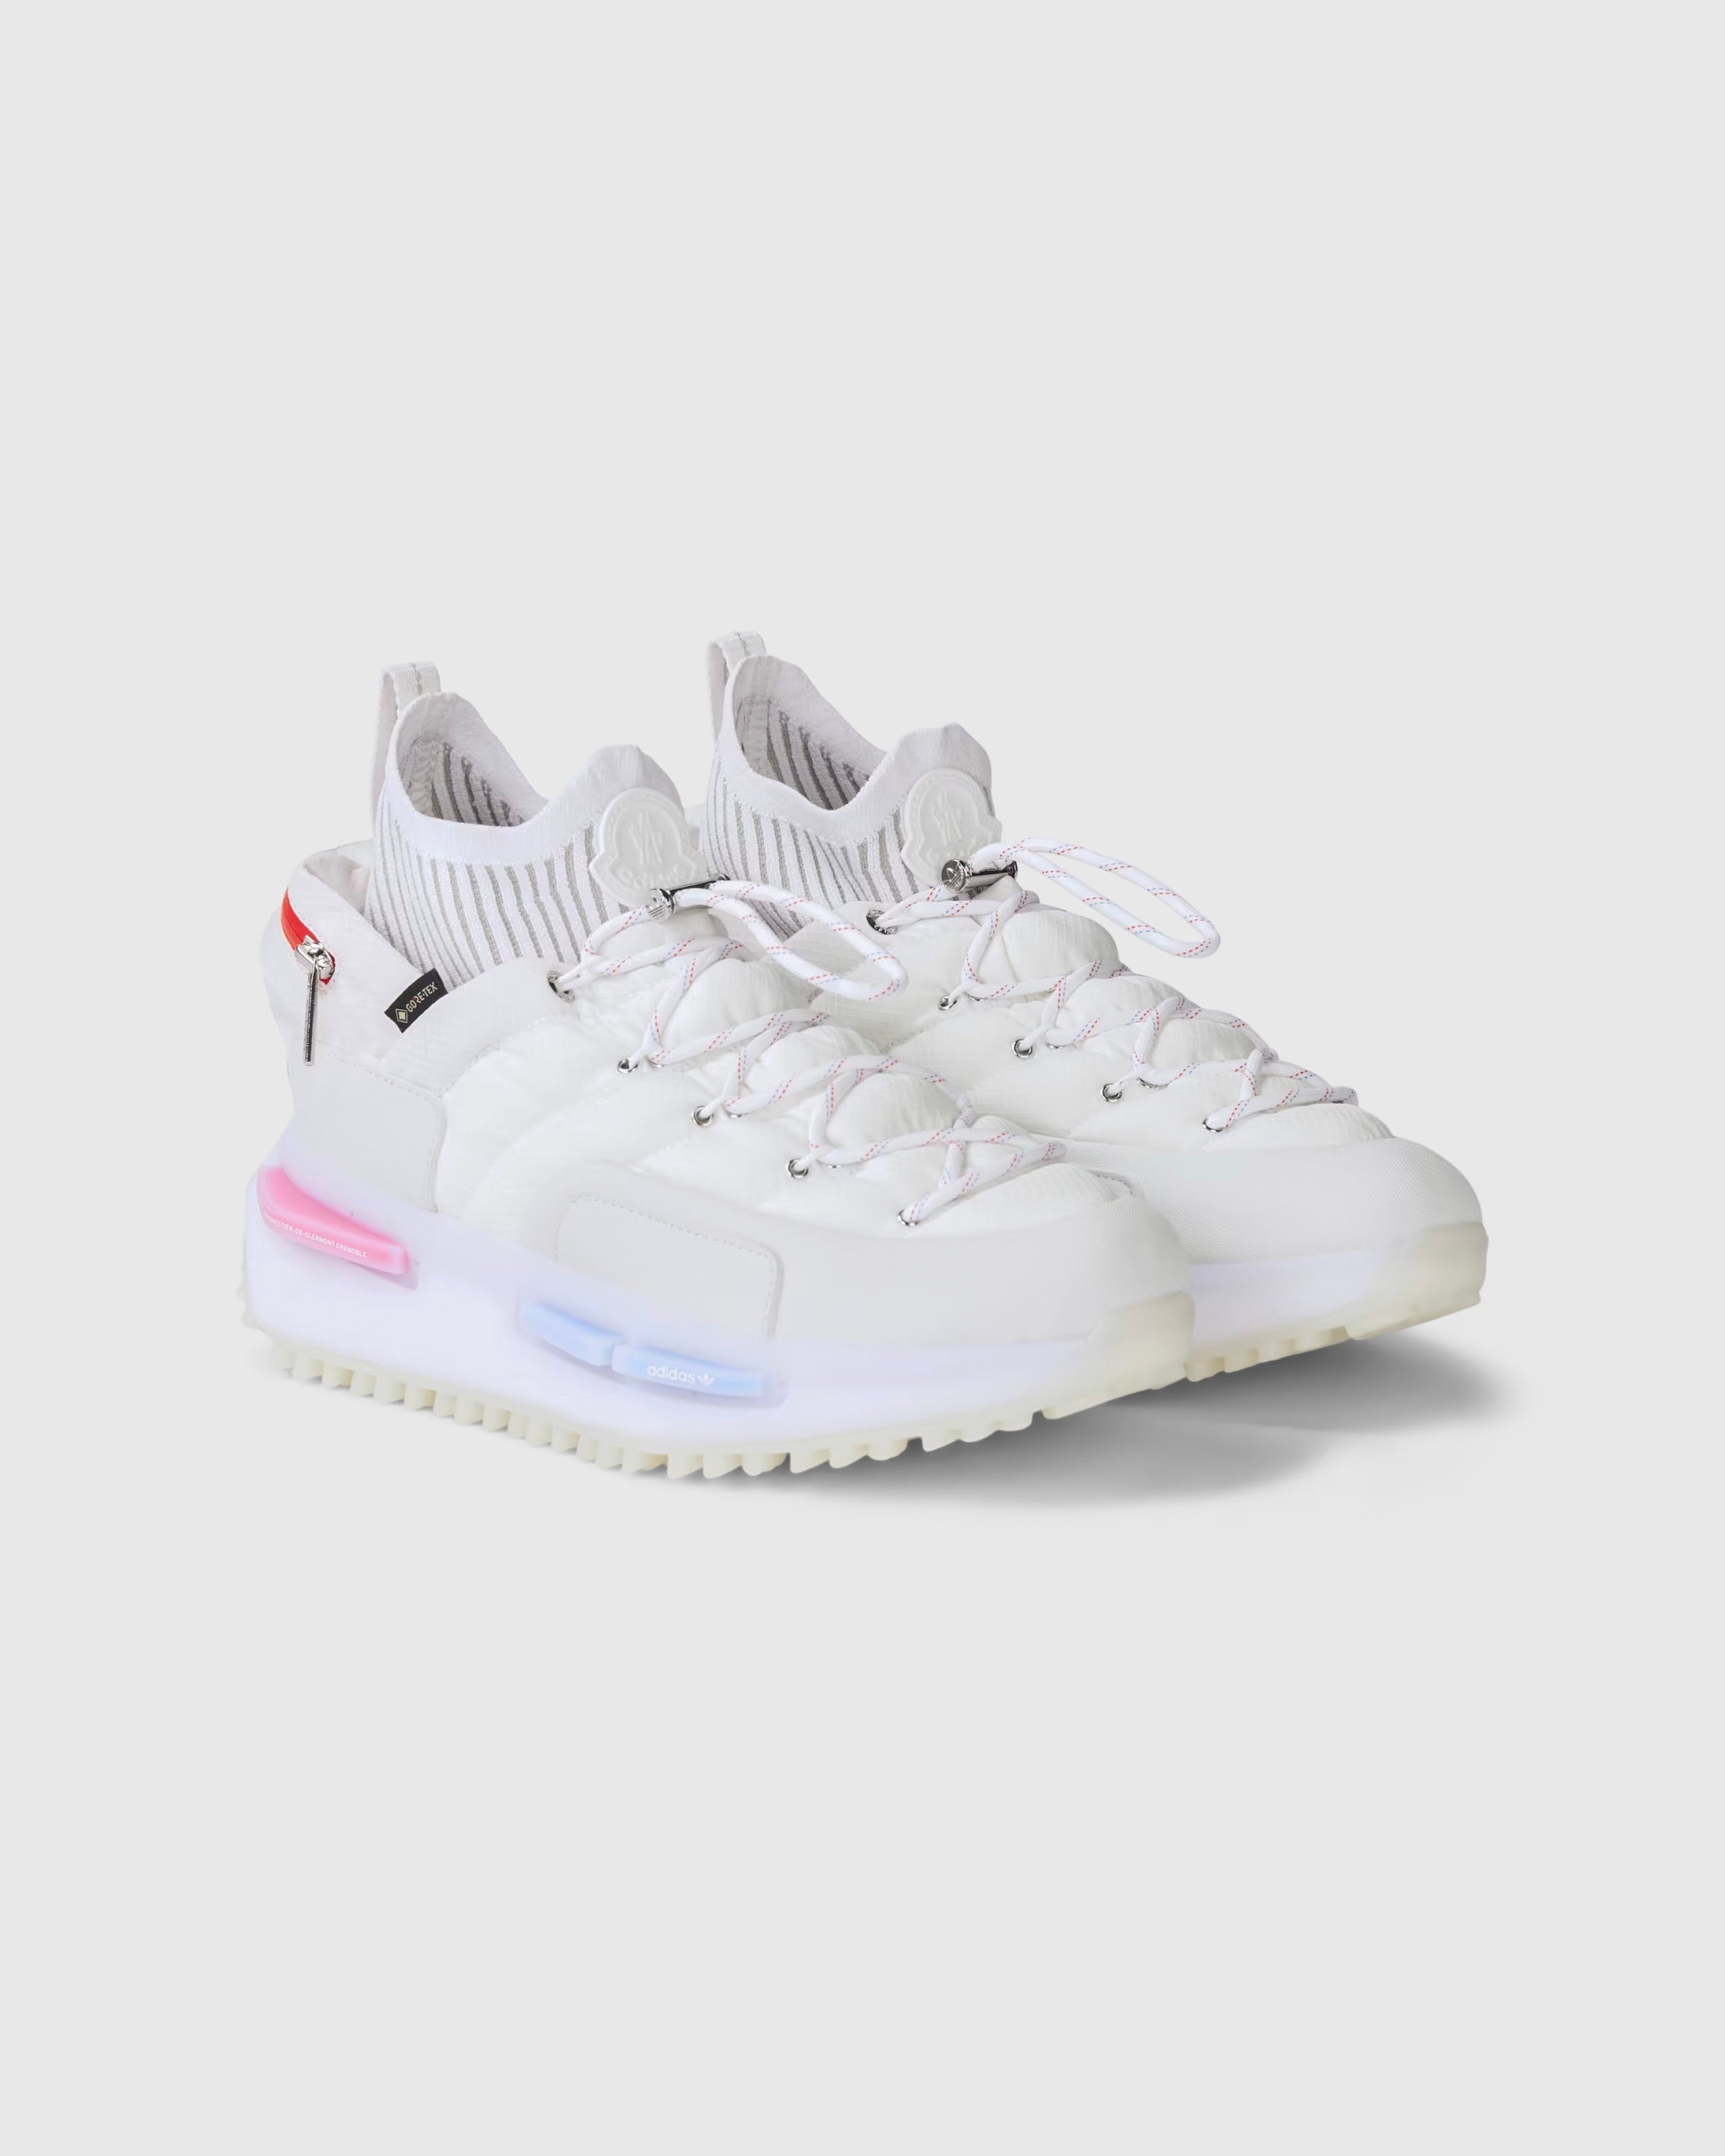 Moncler x adidas Originals – NMD Runner Shoes Core White - Sneakers - White - Image 2